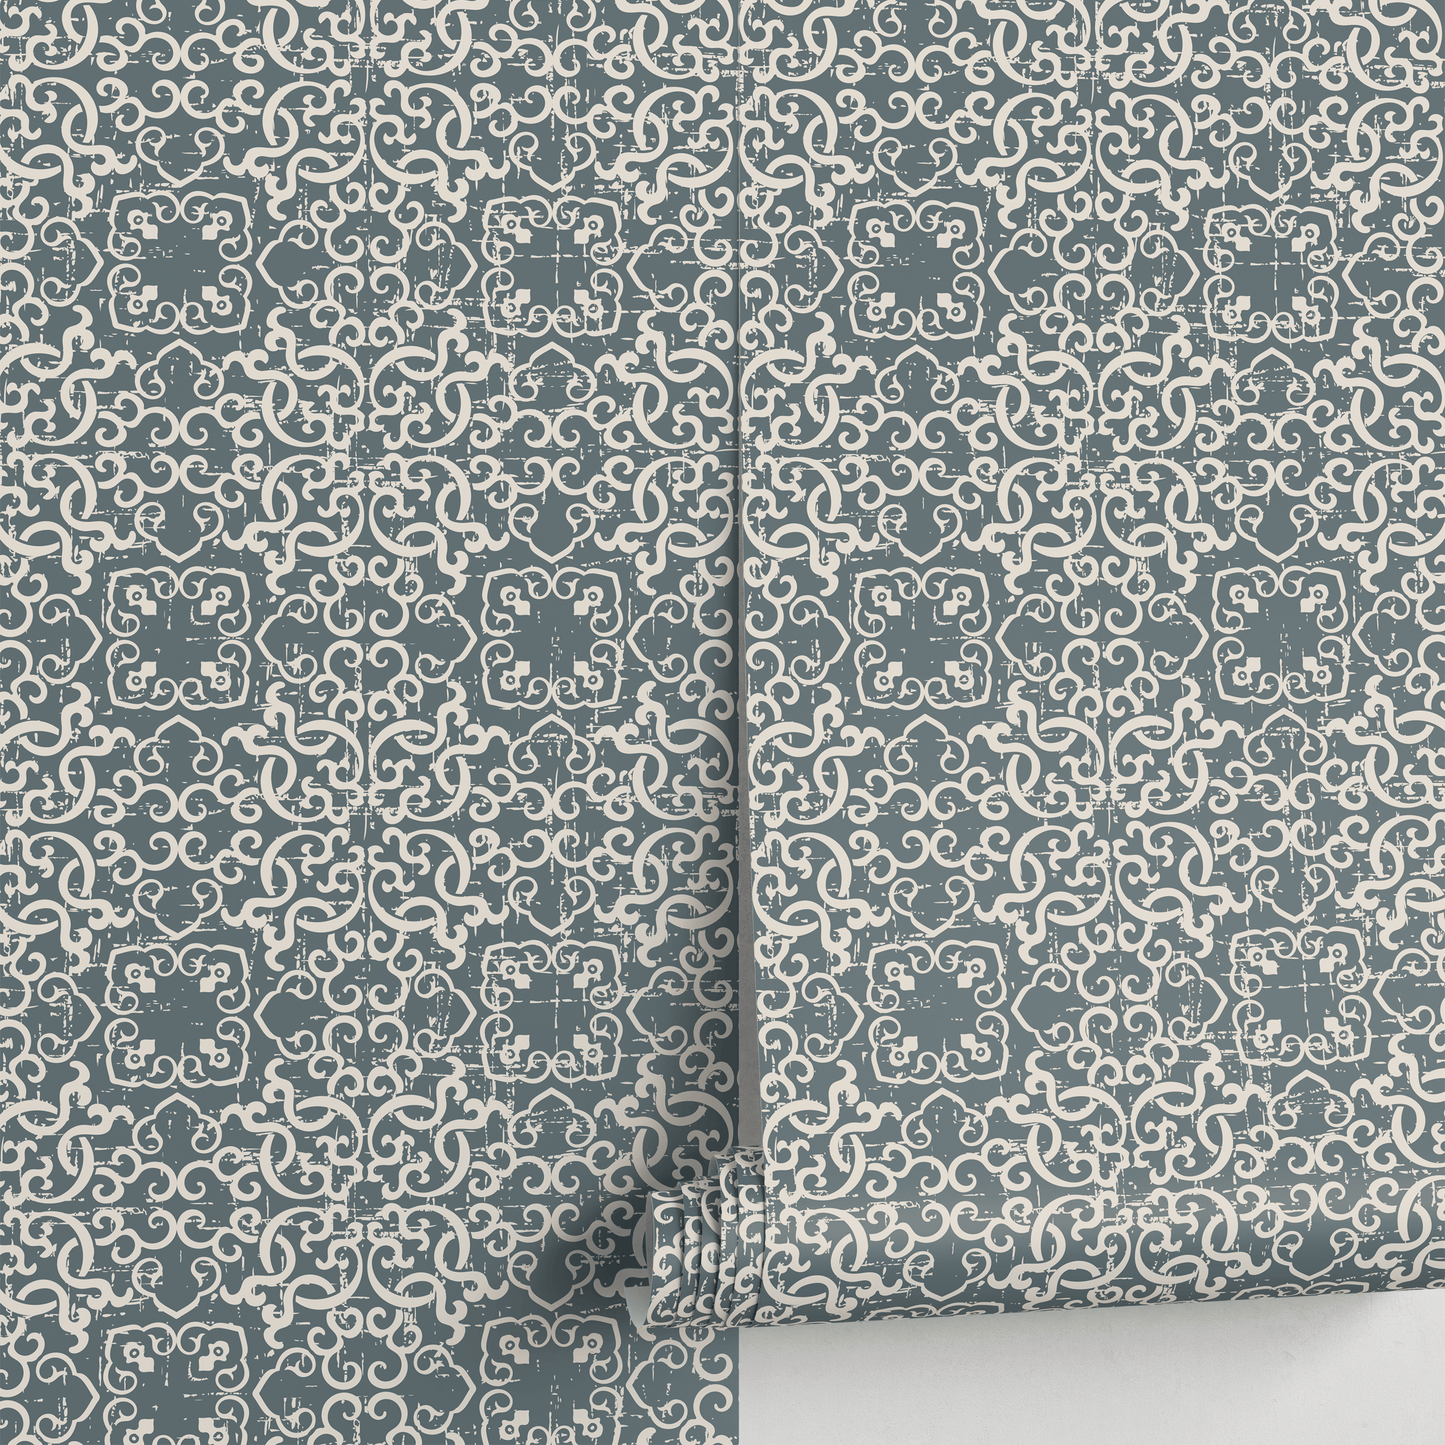 Removable Wallpaper Peel and Stick Wallpaper Wall Paper Wall Mural - Portuguese Azulejos Tile Wallpaper - A554